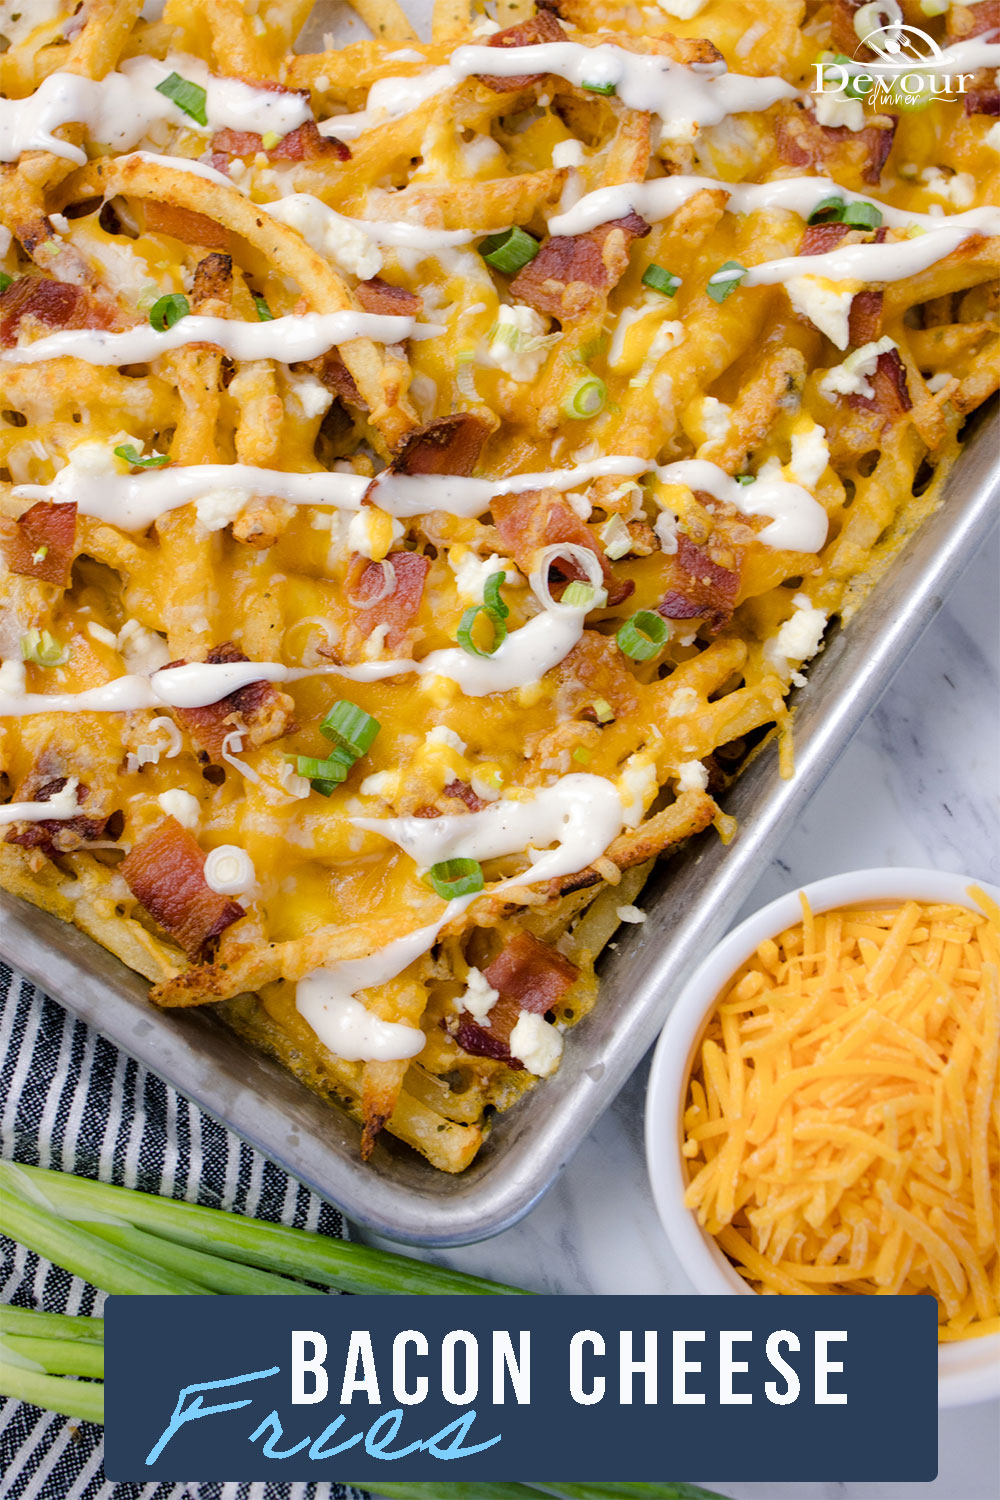 Load up these Bacon Cheese Fries for a delicious snack for Game Day or a side dish for just about any meal. Made with crispy French Fries, bacon crumbles, three different cheeses, and Ranch dressing, this dish is so addictive!